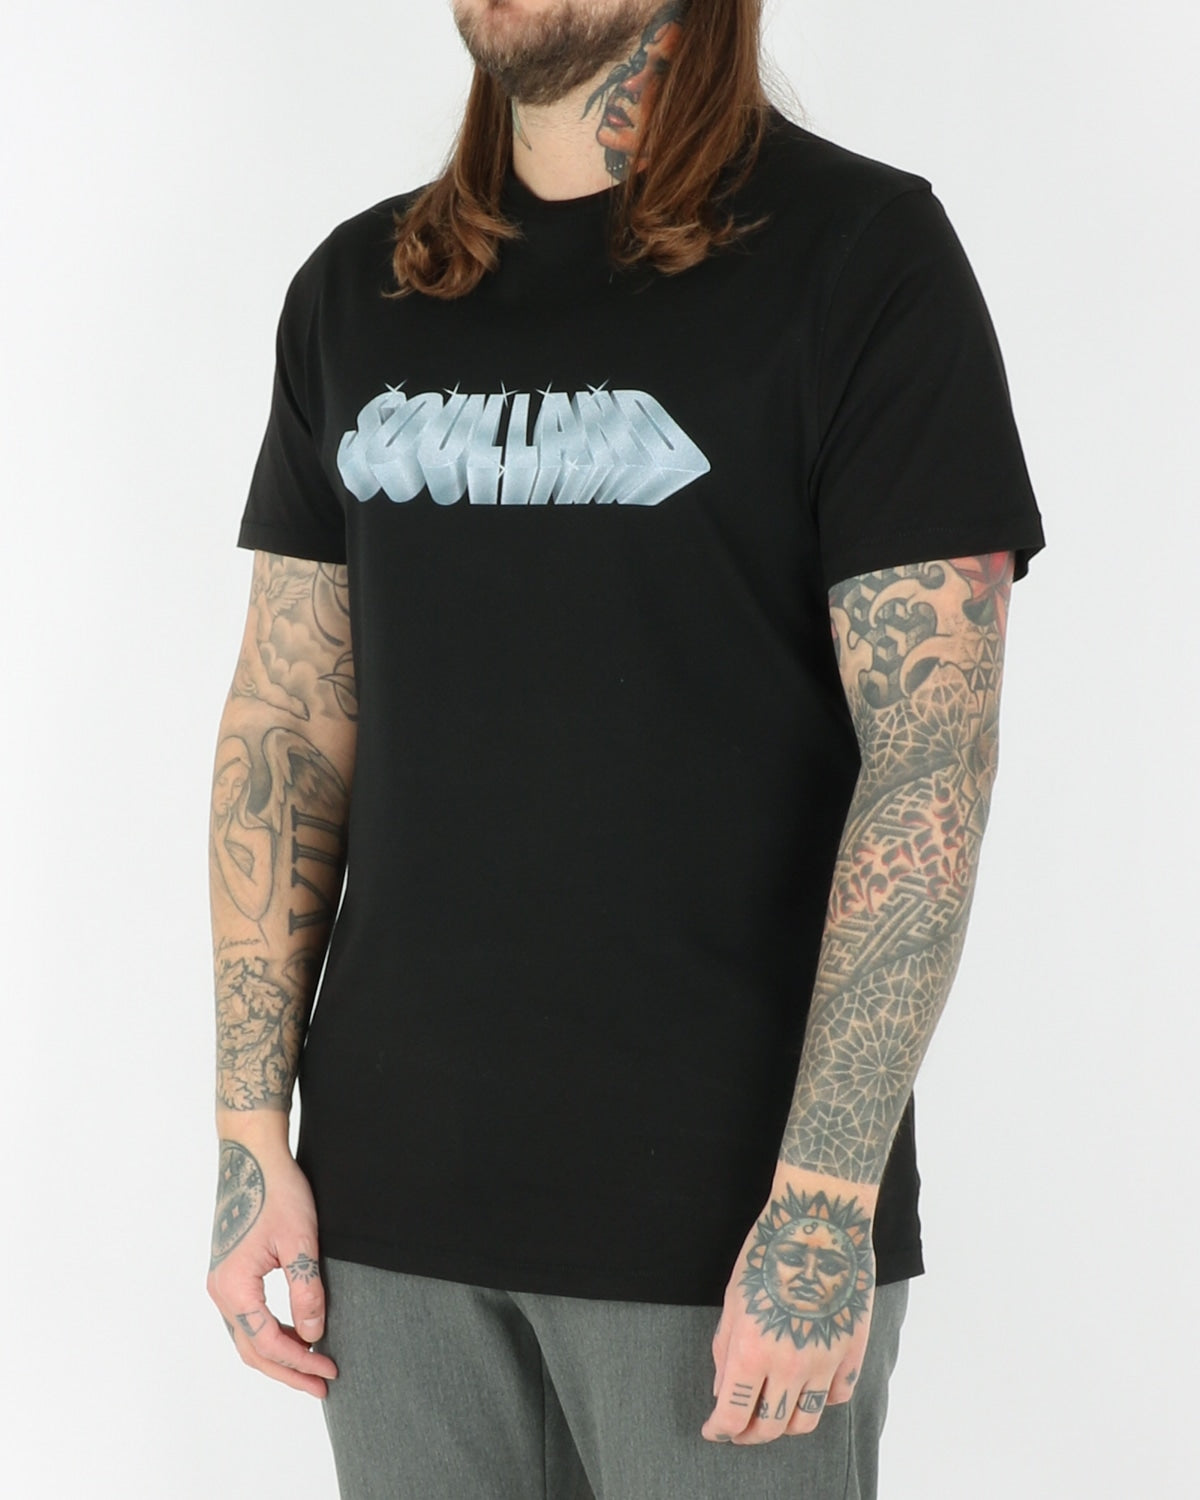 soulland_gus t-shirt_black with print_2_3